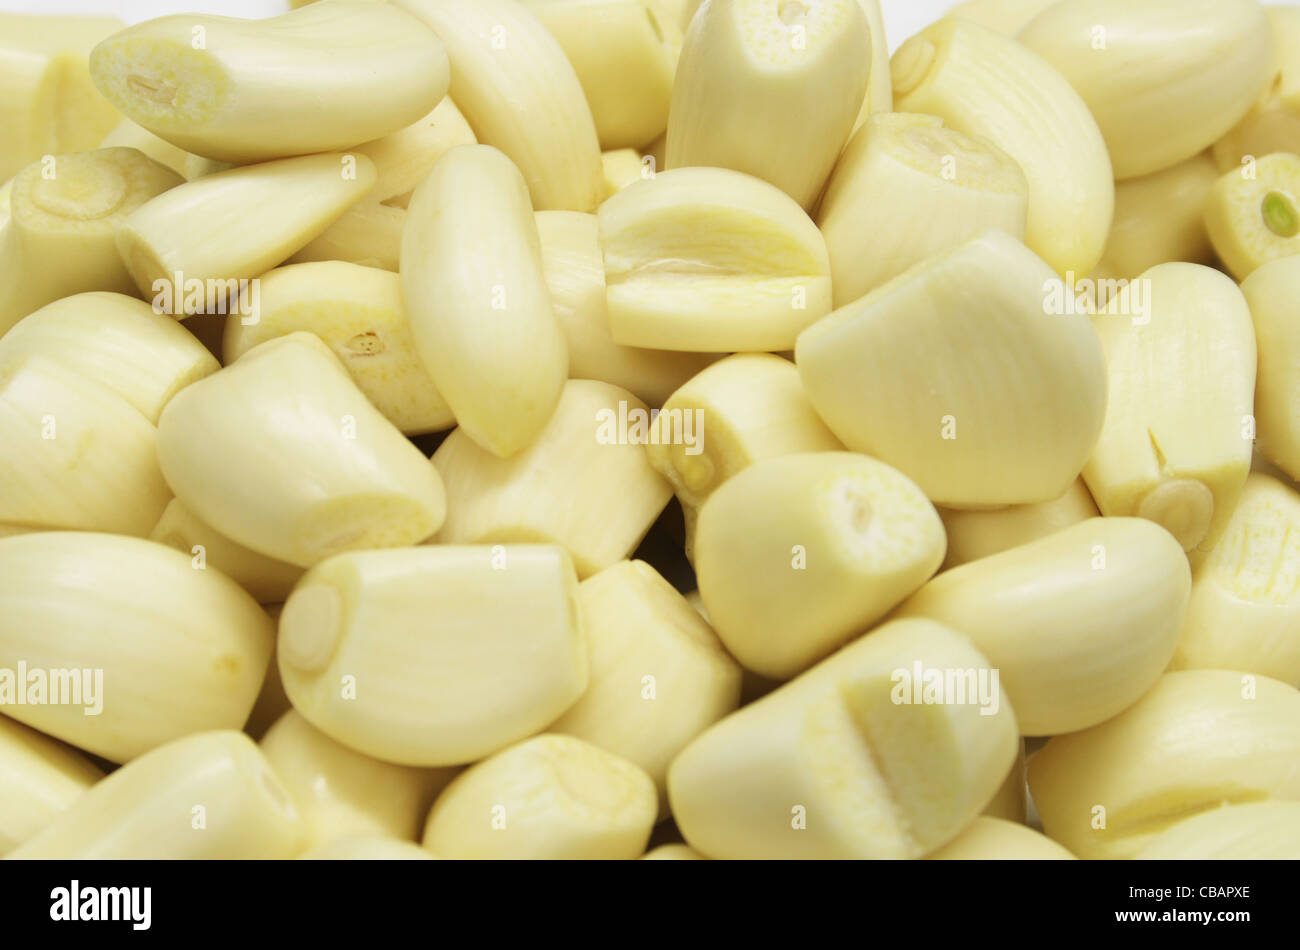 background of trimmed peeled garlic cloves Stock Photo